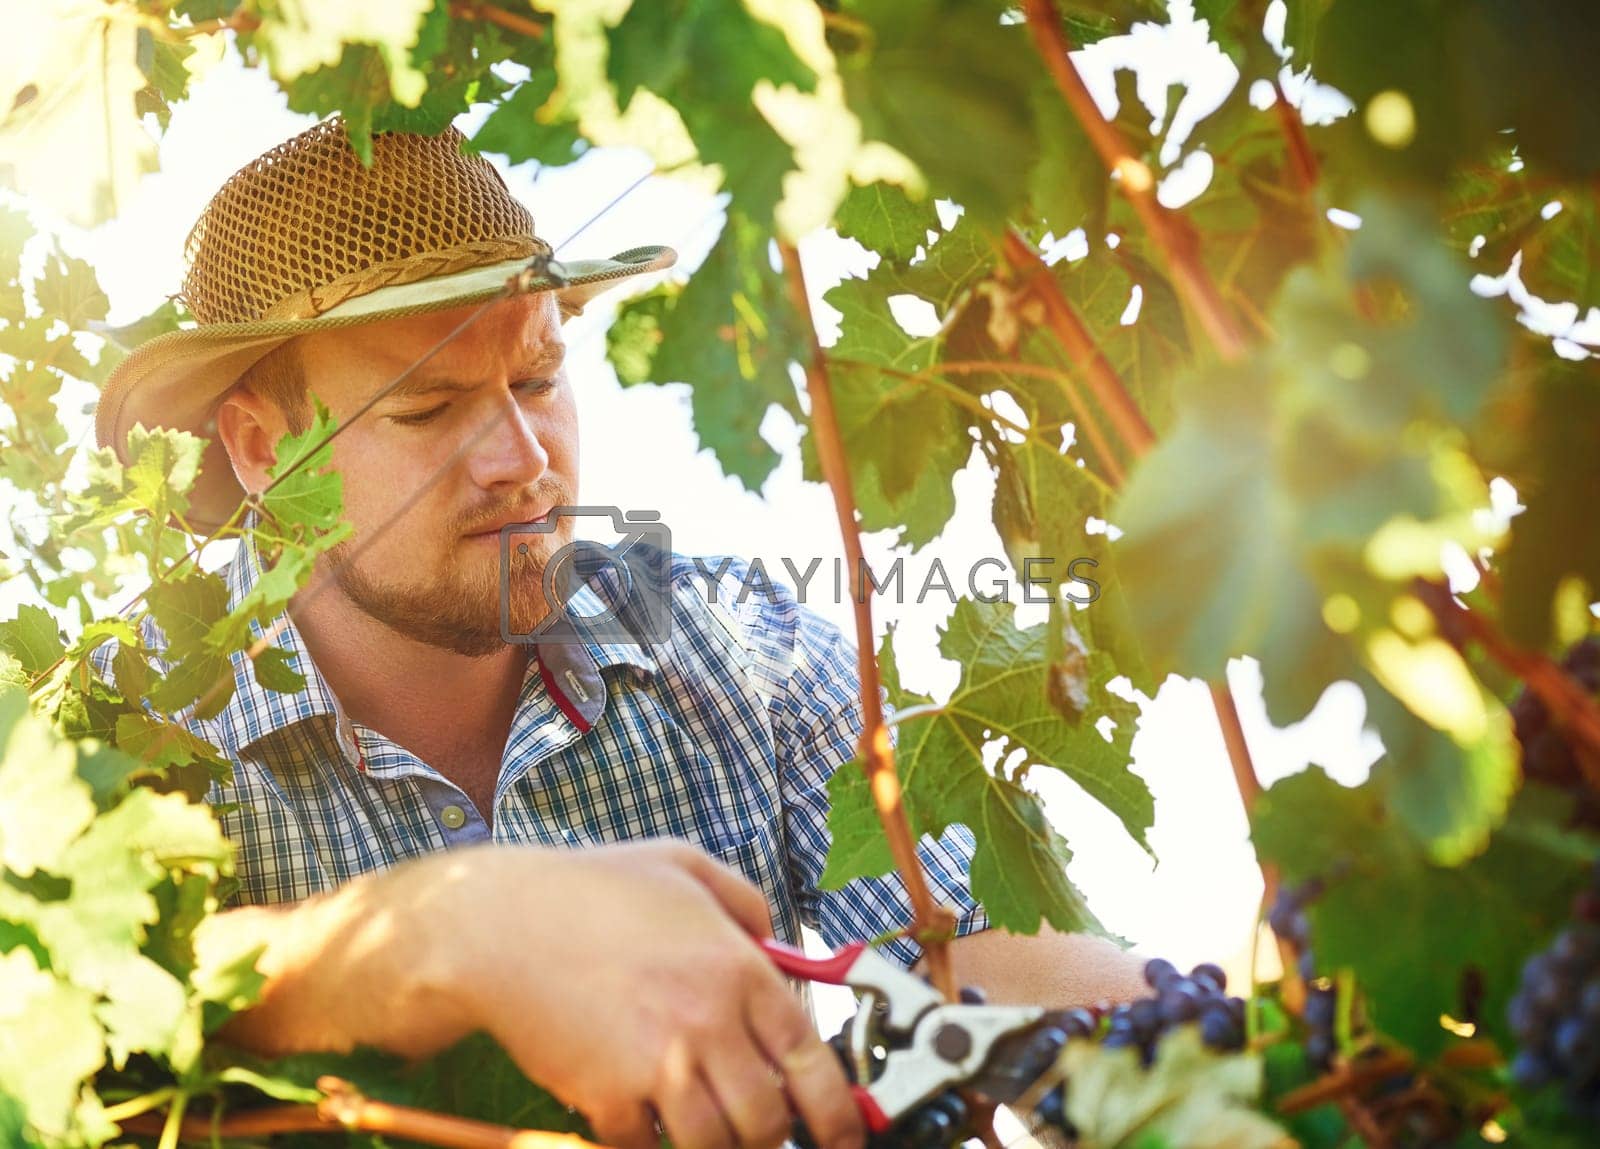 Royalty free image of Pruning grapes the correct way is key. a farmer harvesting grapes. by YuriArcurs